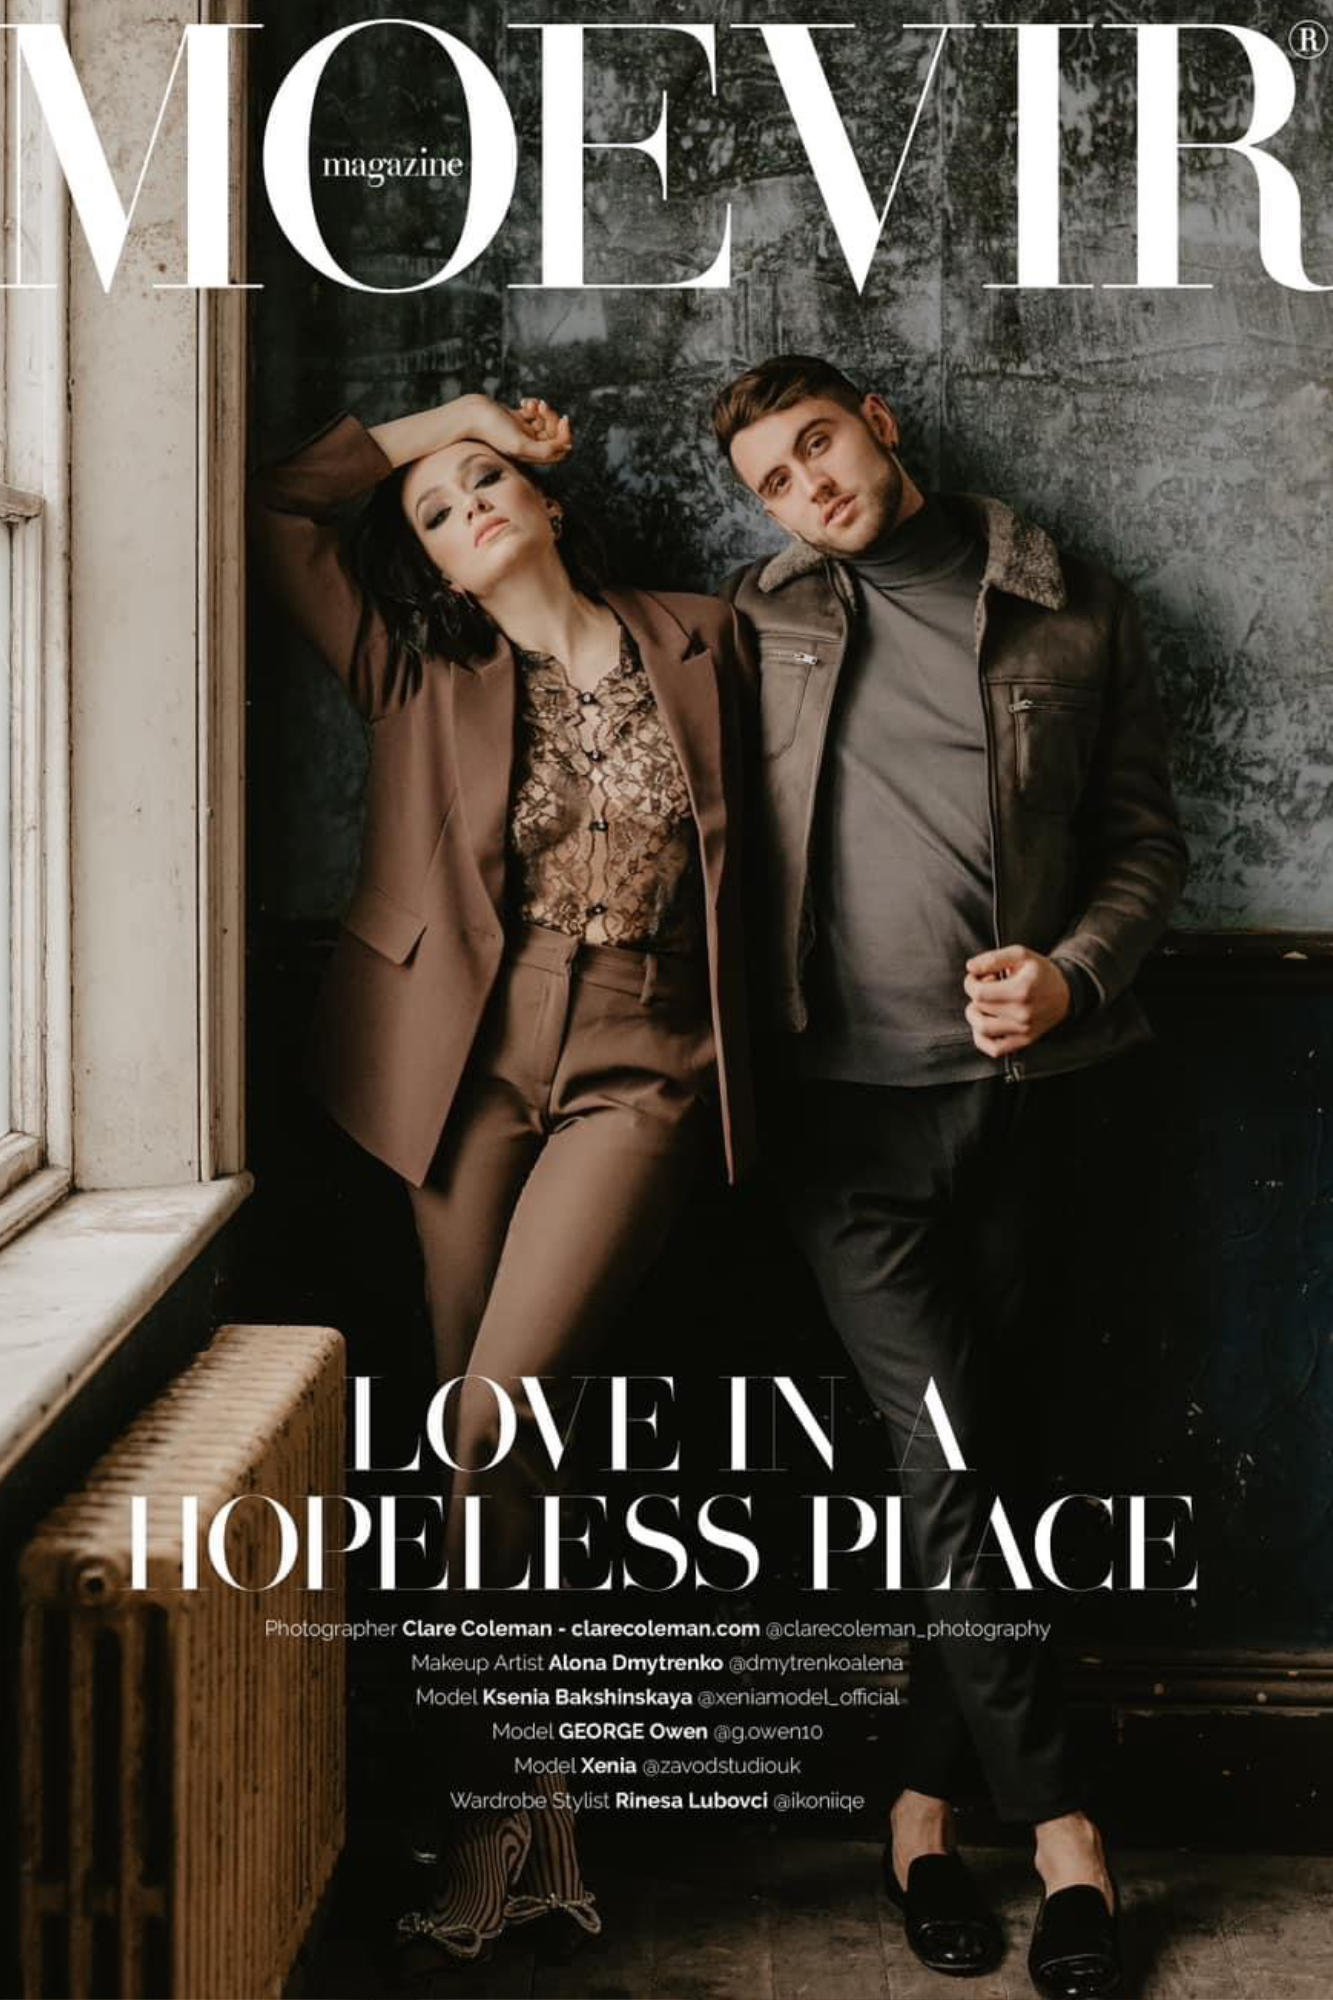 Preview image for post: Moevir Magazine - Love in a Hopeless place